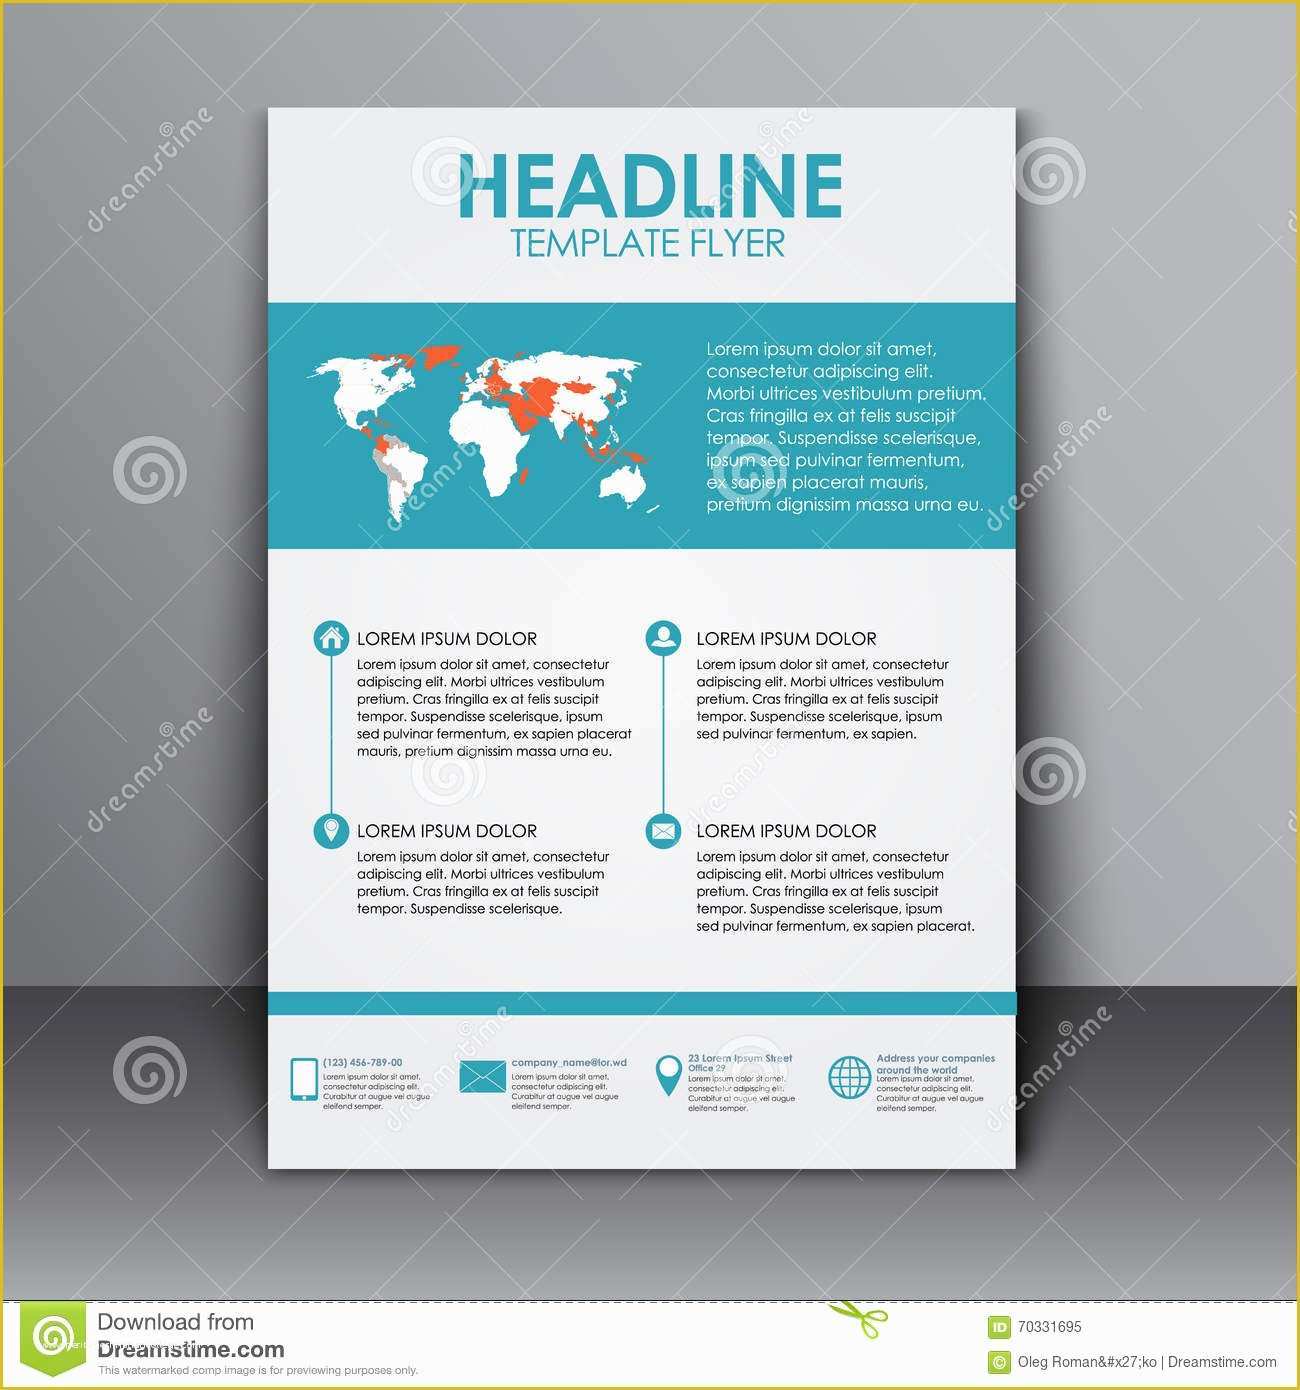 Free Handout Templates Of Template Flyer with Information for Advertising Stock